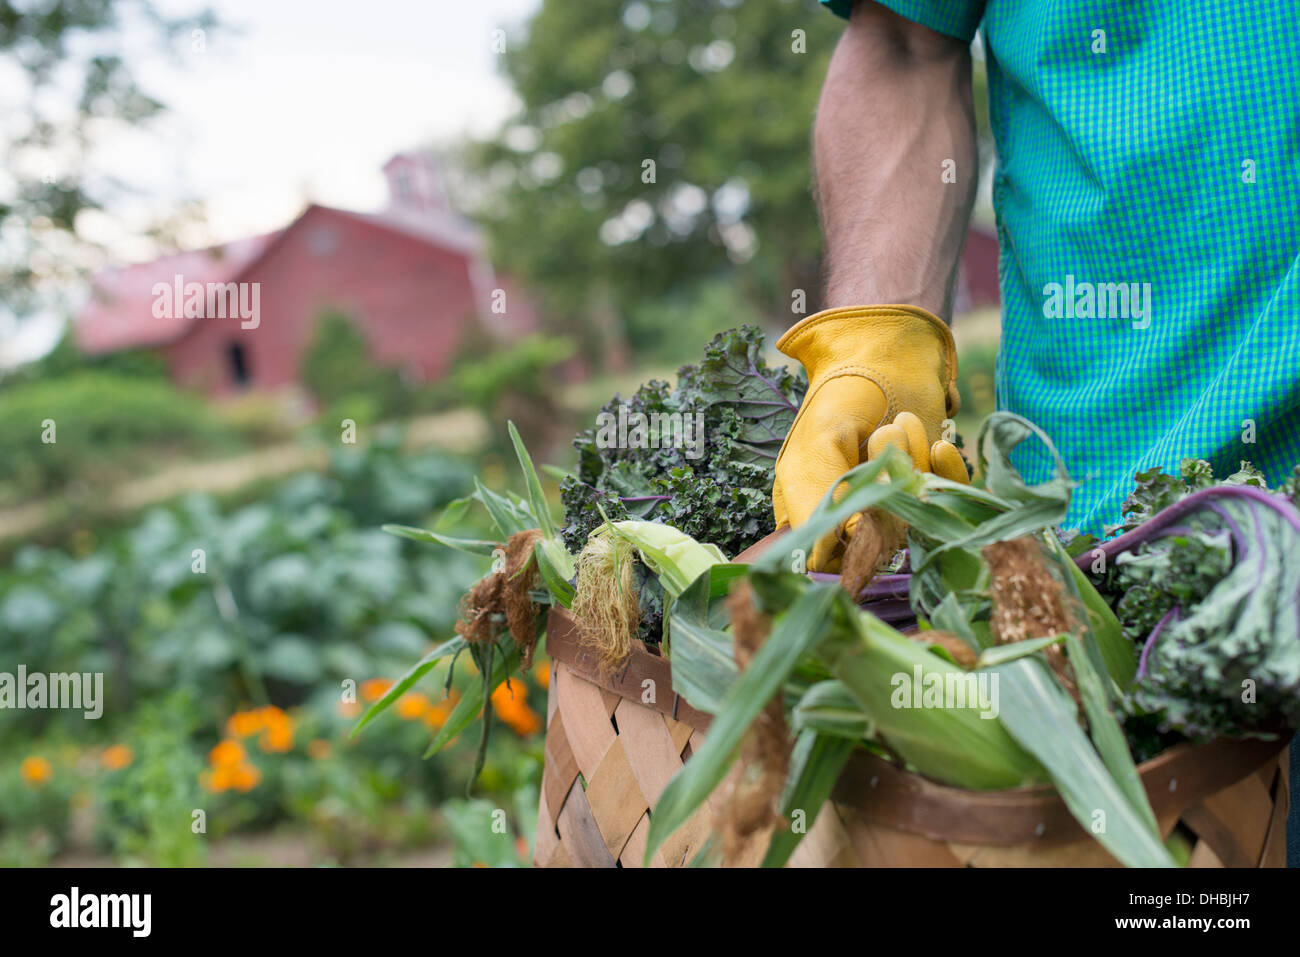 An organic vegetable garden on a farm. A man carrying a basket of freshly harvested corn on the cob. Stock Photo